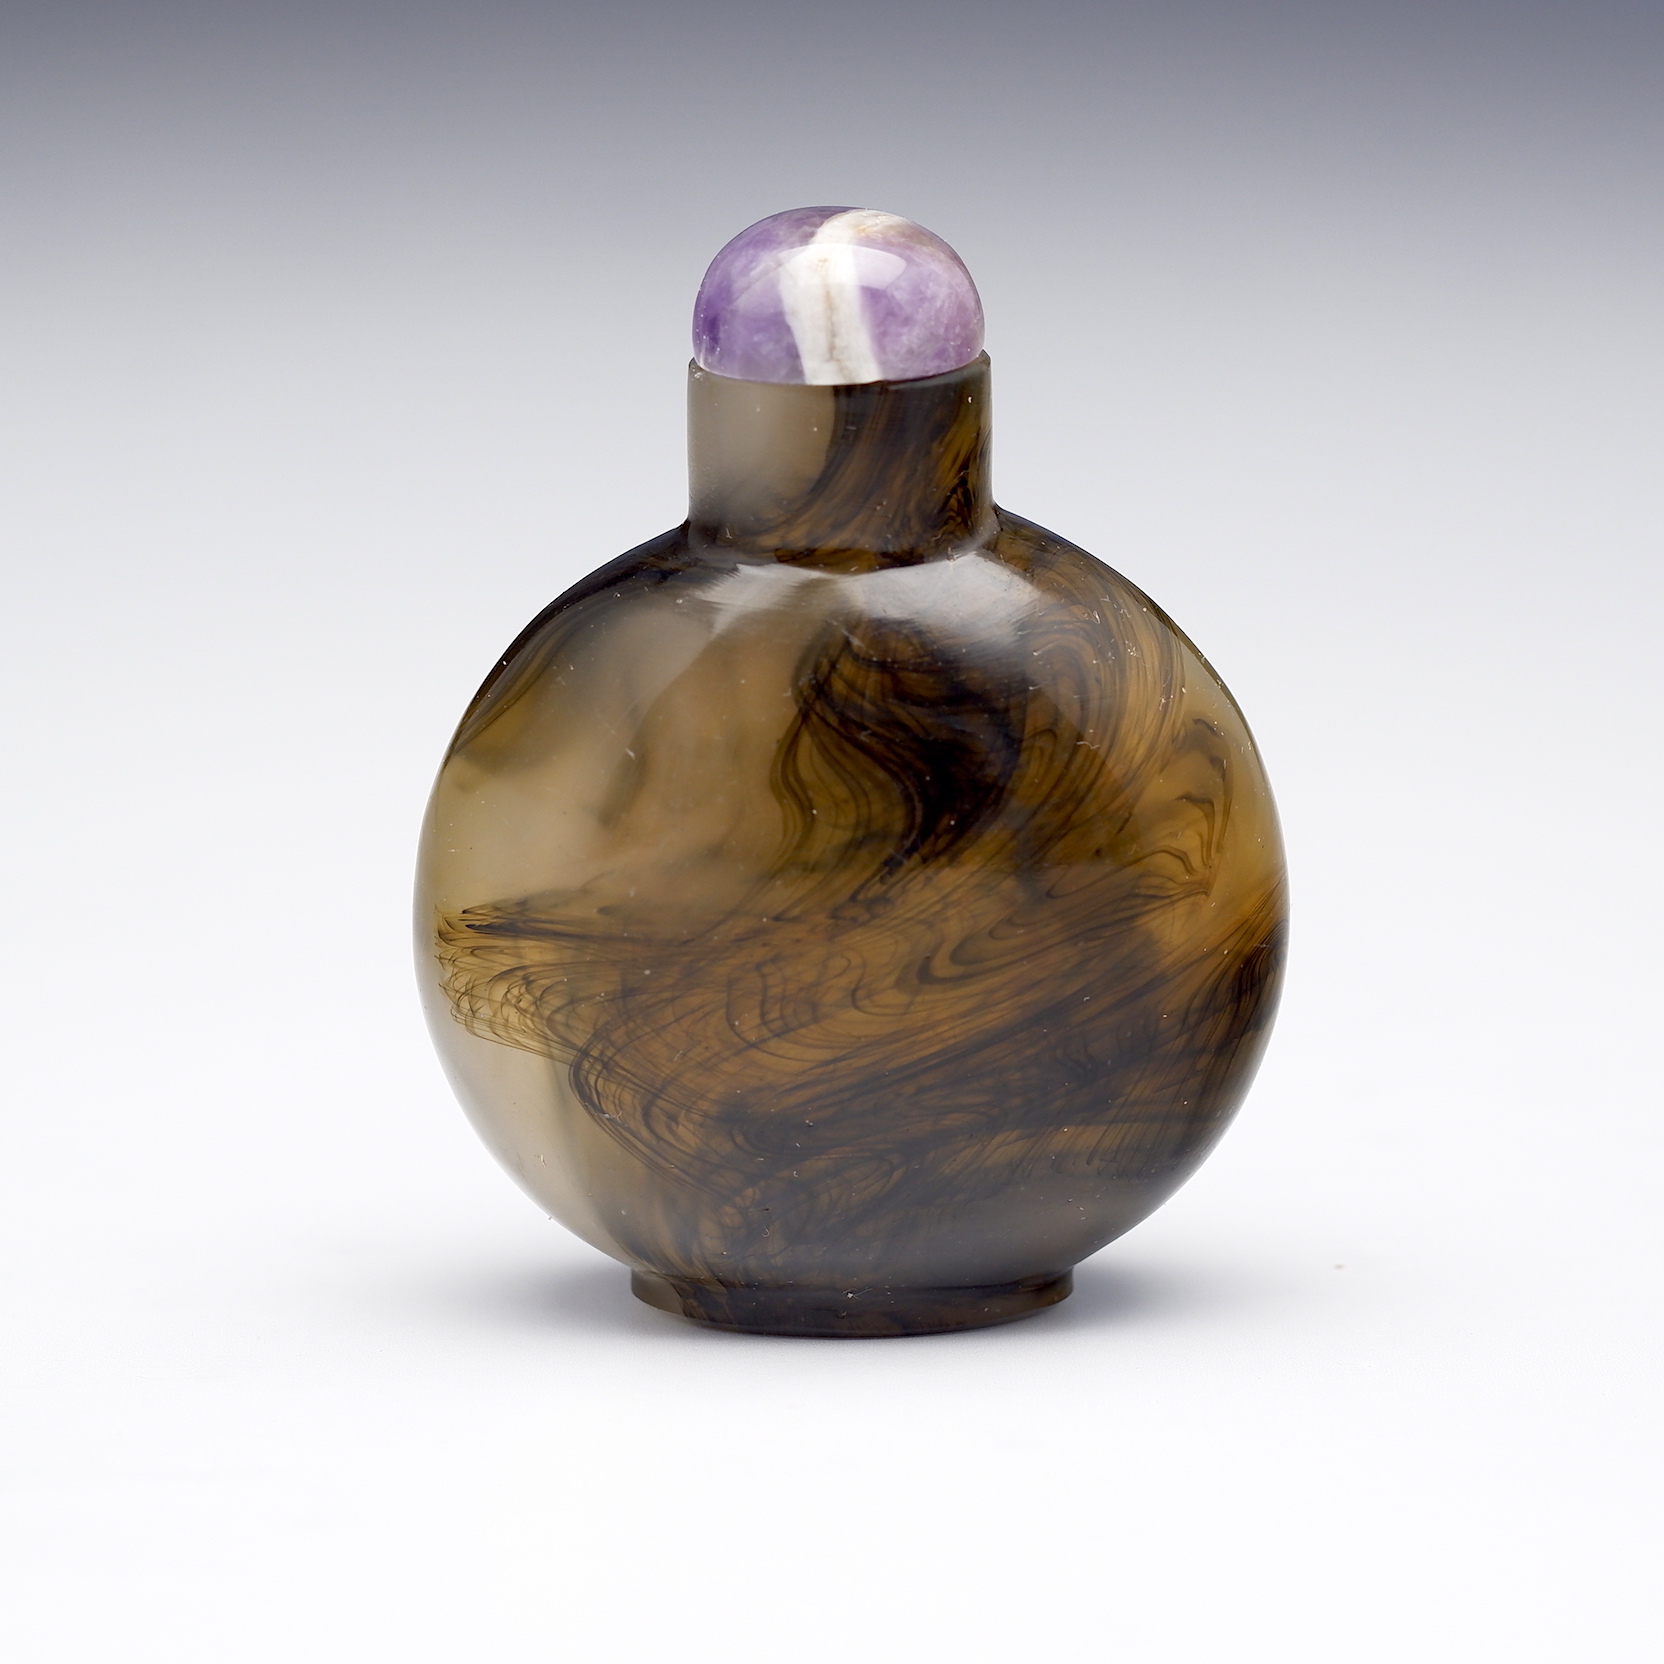 'Chinese Agate Snuff Bottle with Amethyst Quartz Stopper'